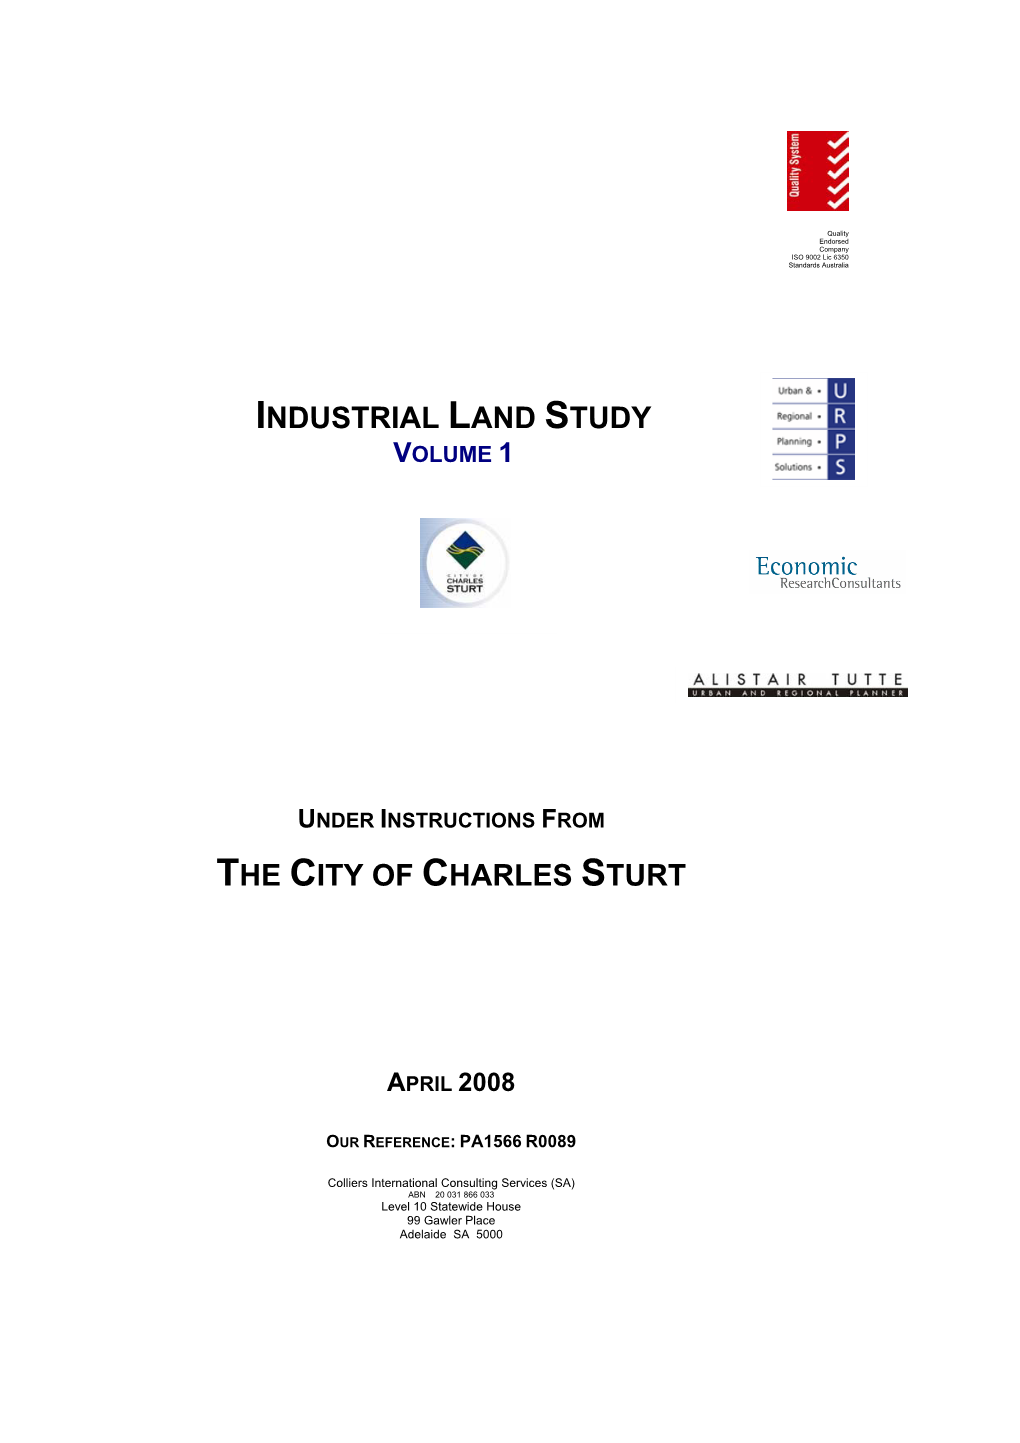 Industrial Land Study the City of Charles Sturt